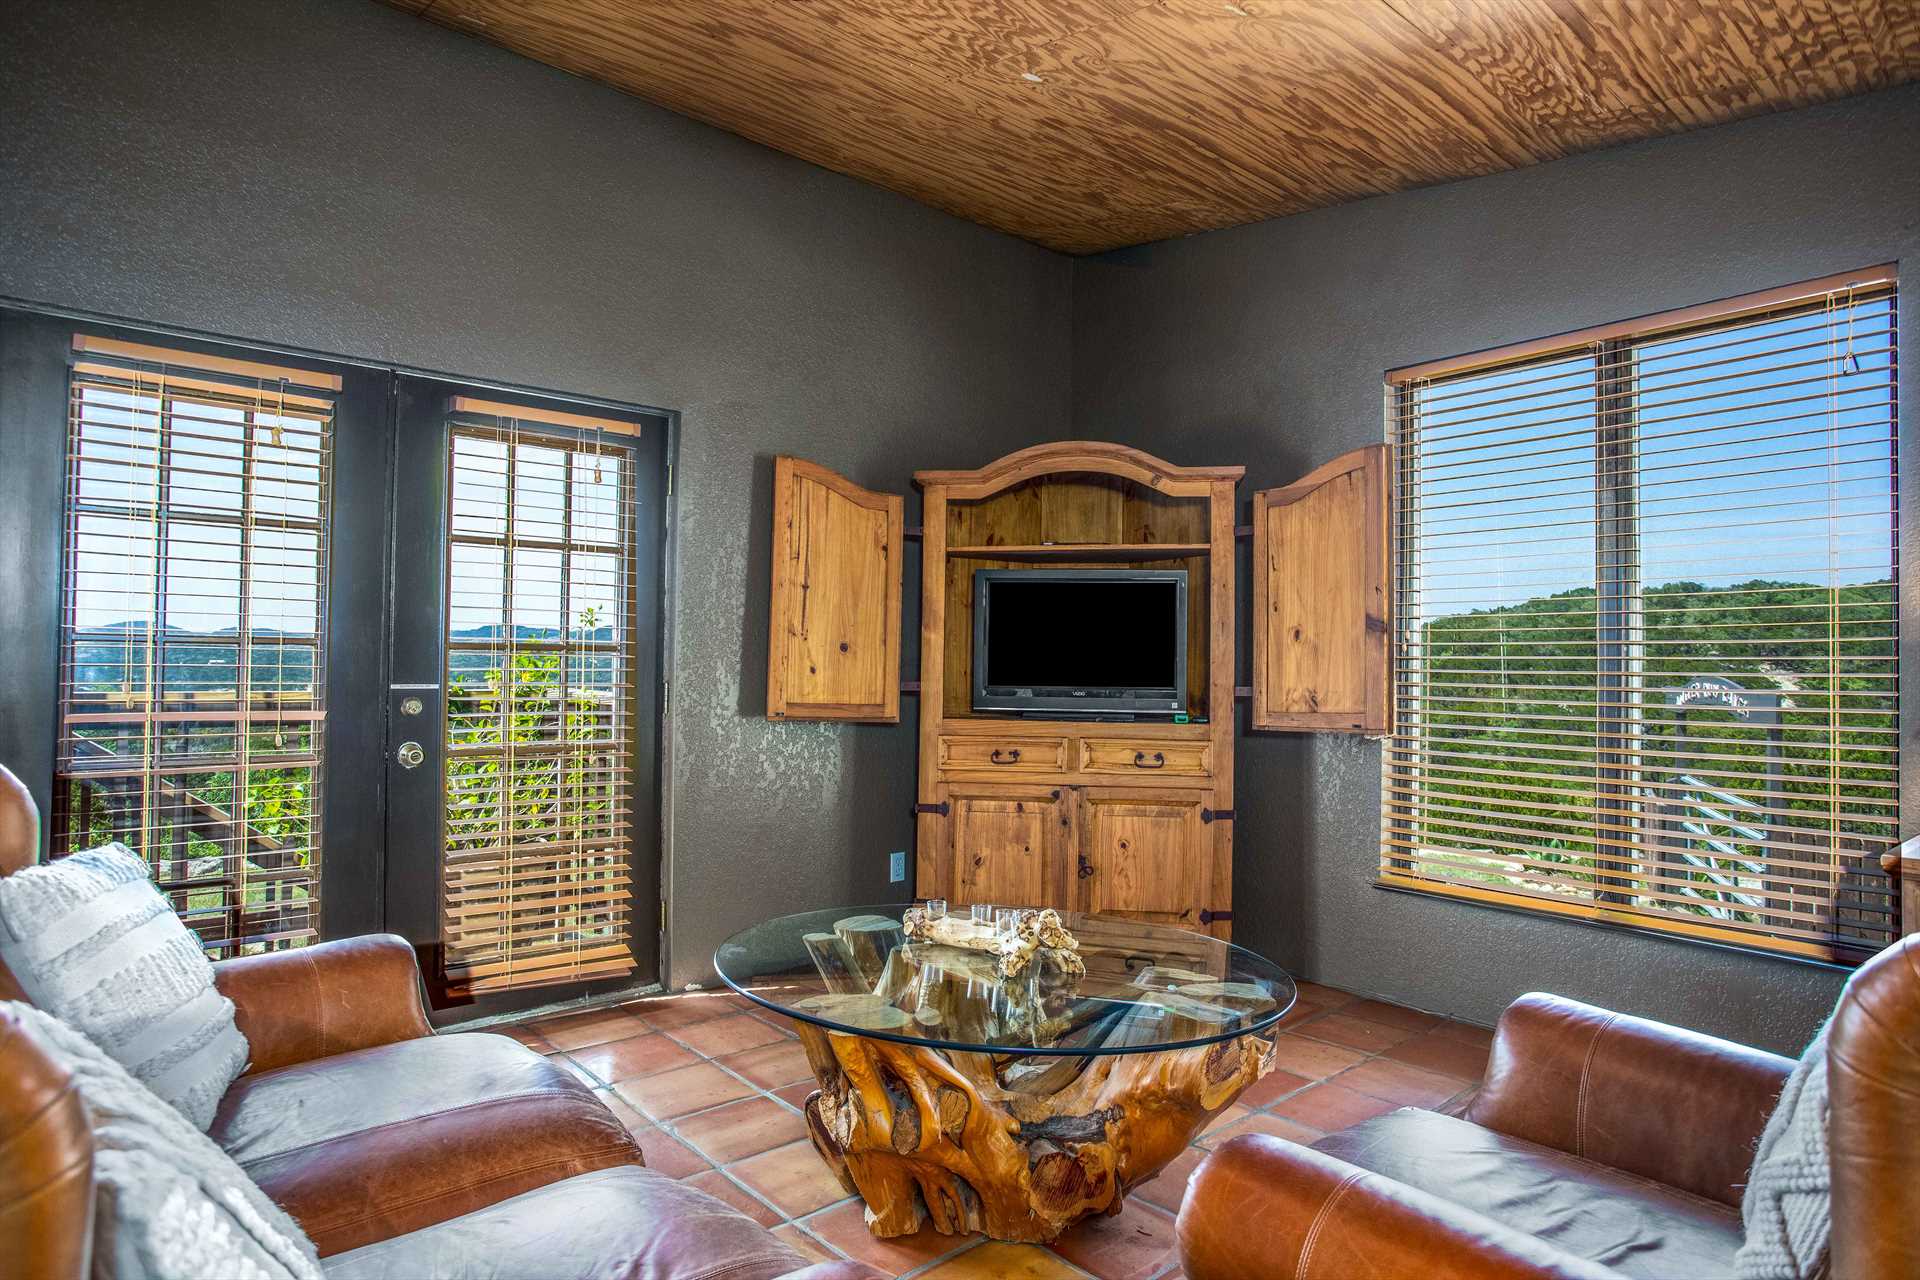                                                 Even while enjoying movie night, you'll have access to amazing mountain views with the plentiful windows at the cabin!